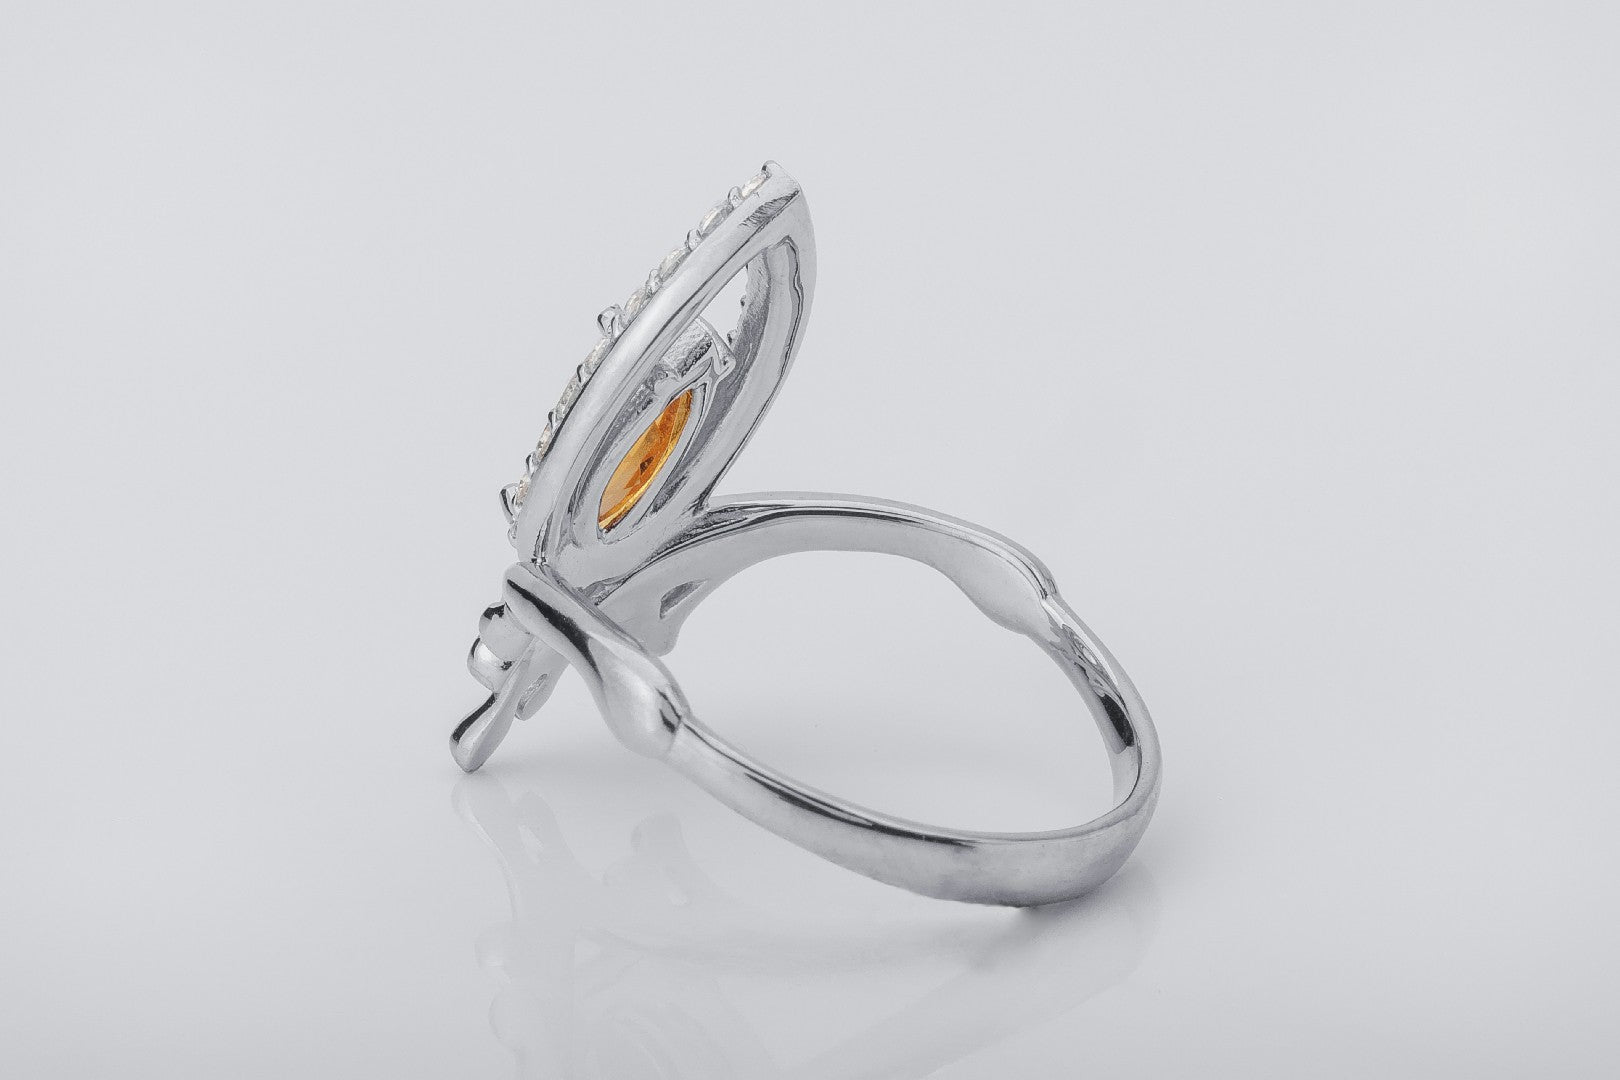 Candle Flame Ring with Citrine and CZ gems, Rhodium plated 925 silver - vikingworkshop